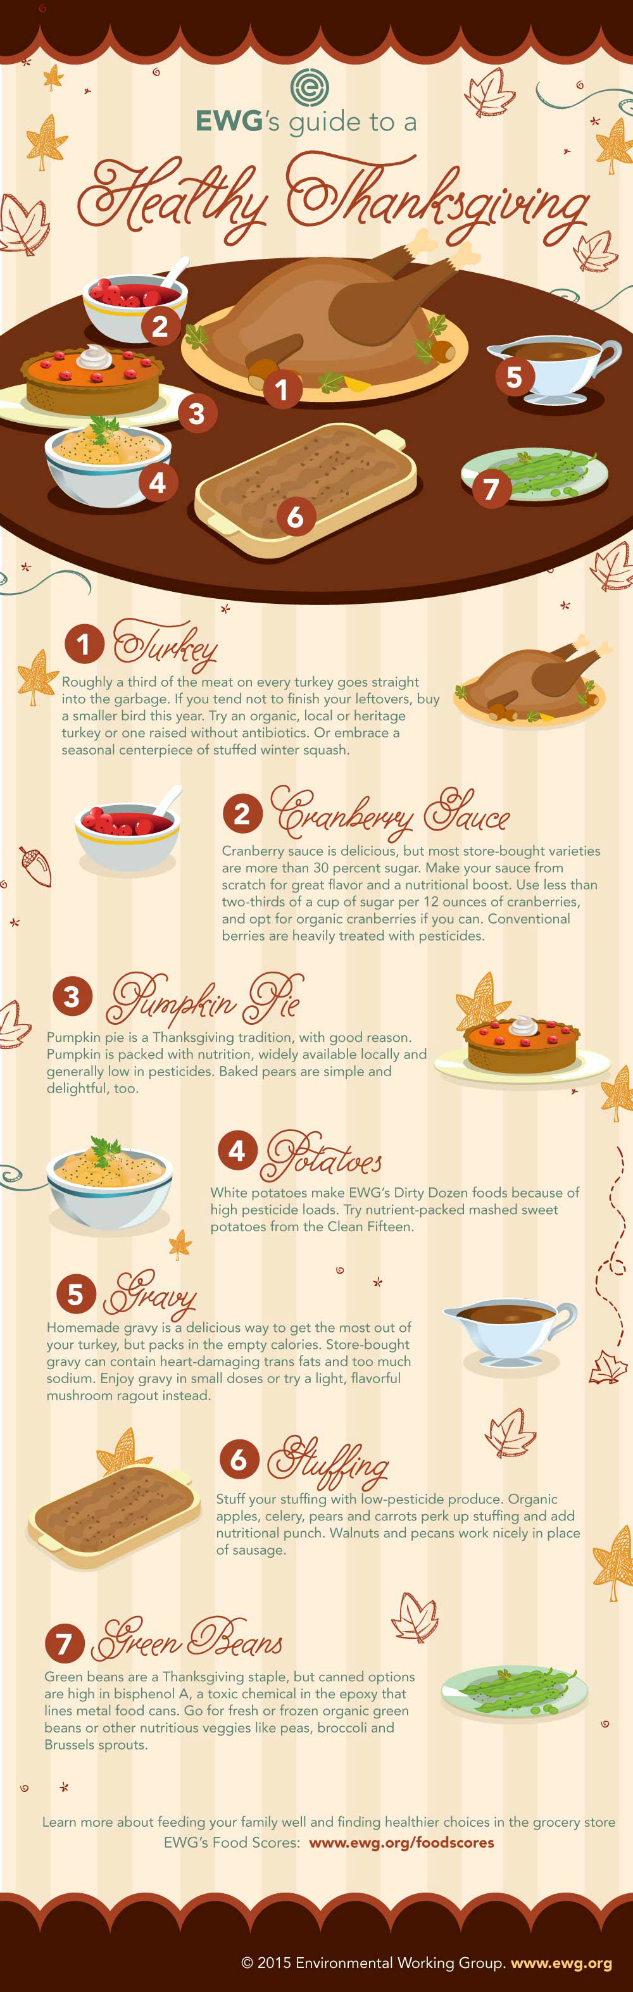 Eco-friendly guide to a healthy Thanksgiving meal | The Momiverse